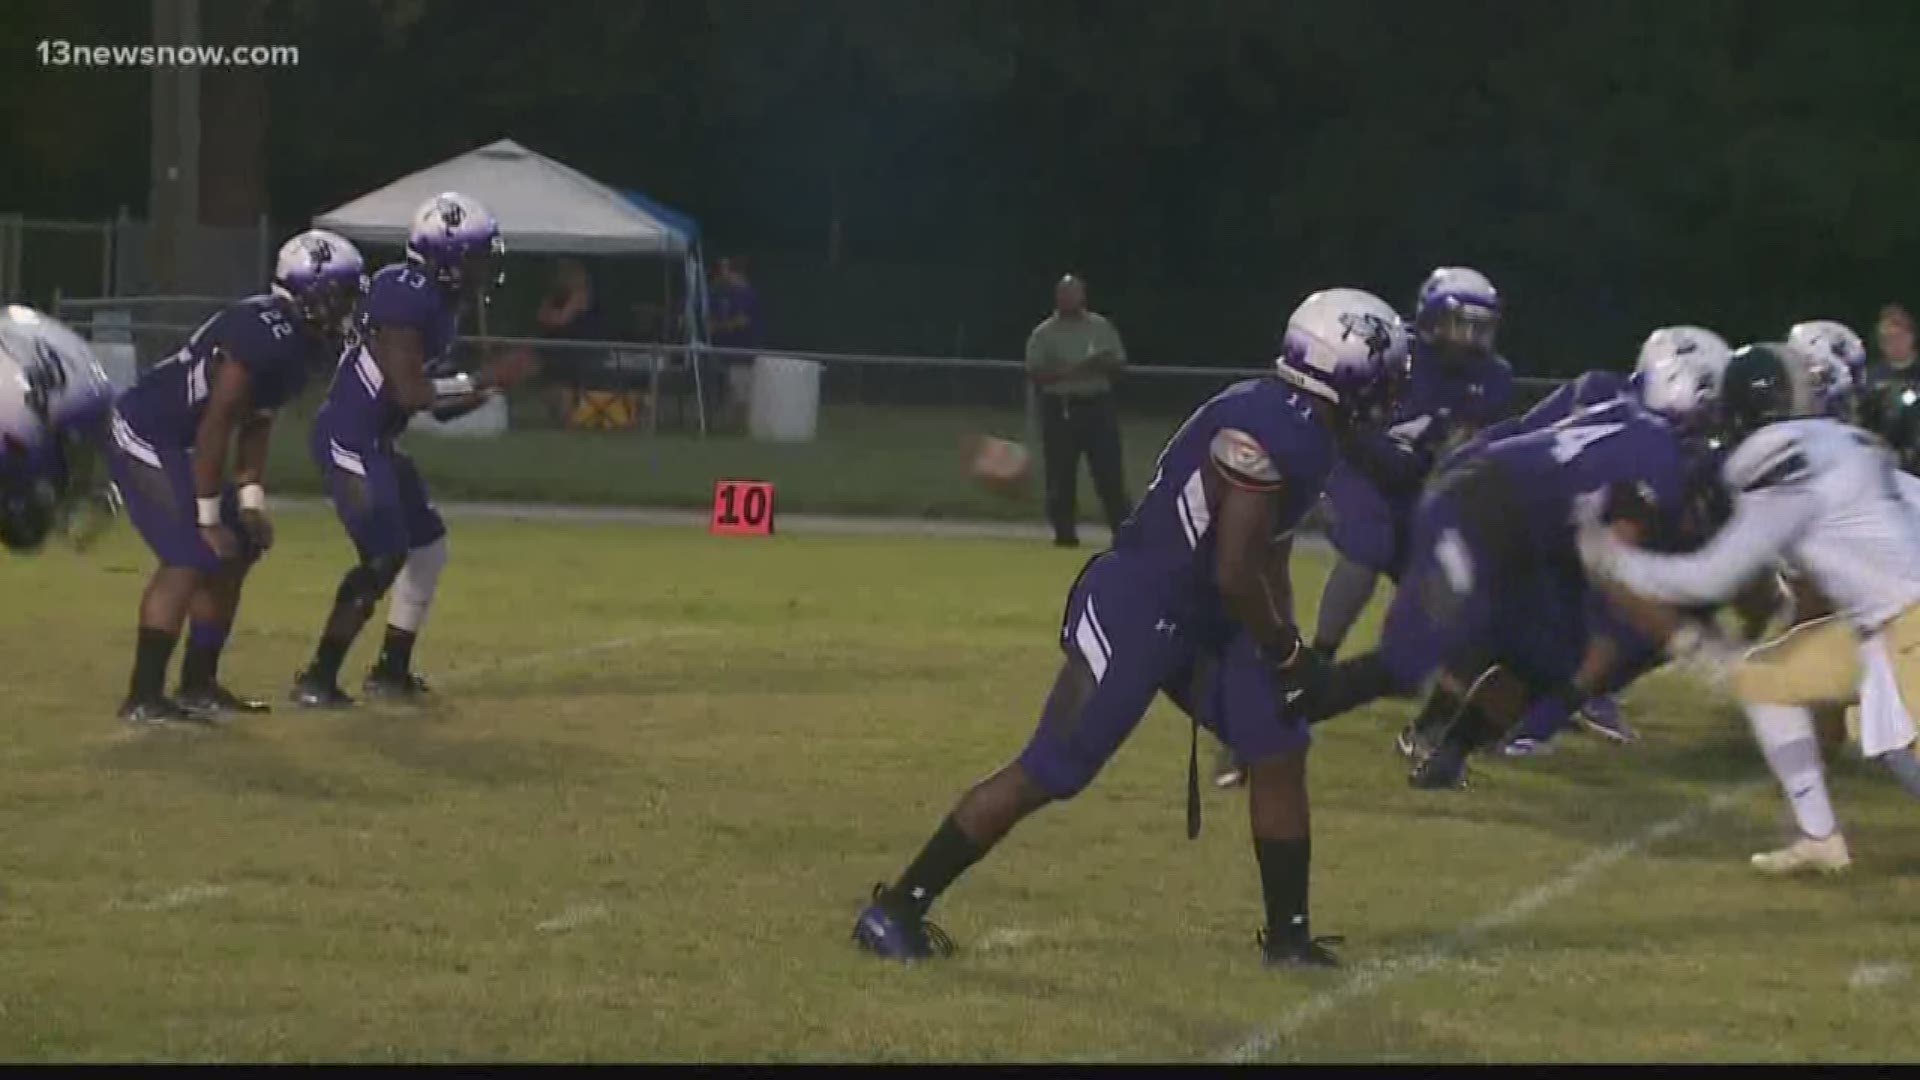 More makeup games on the high school schedule on Tuesday night. Check out highlights from Deep Creek's 24-0 win over Western Branch.